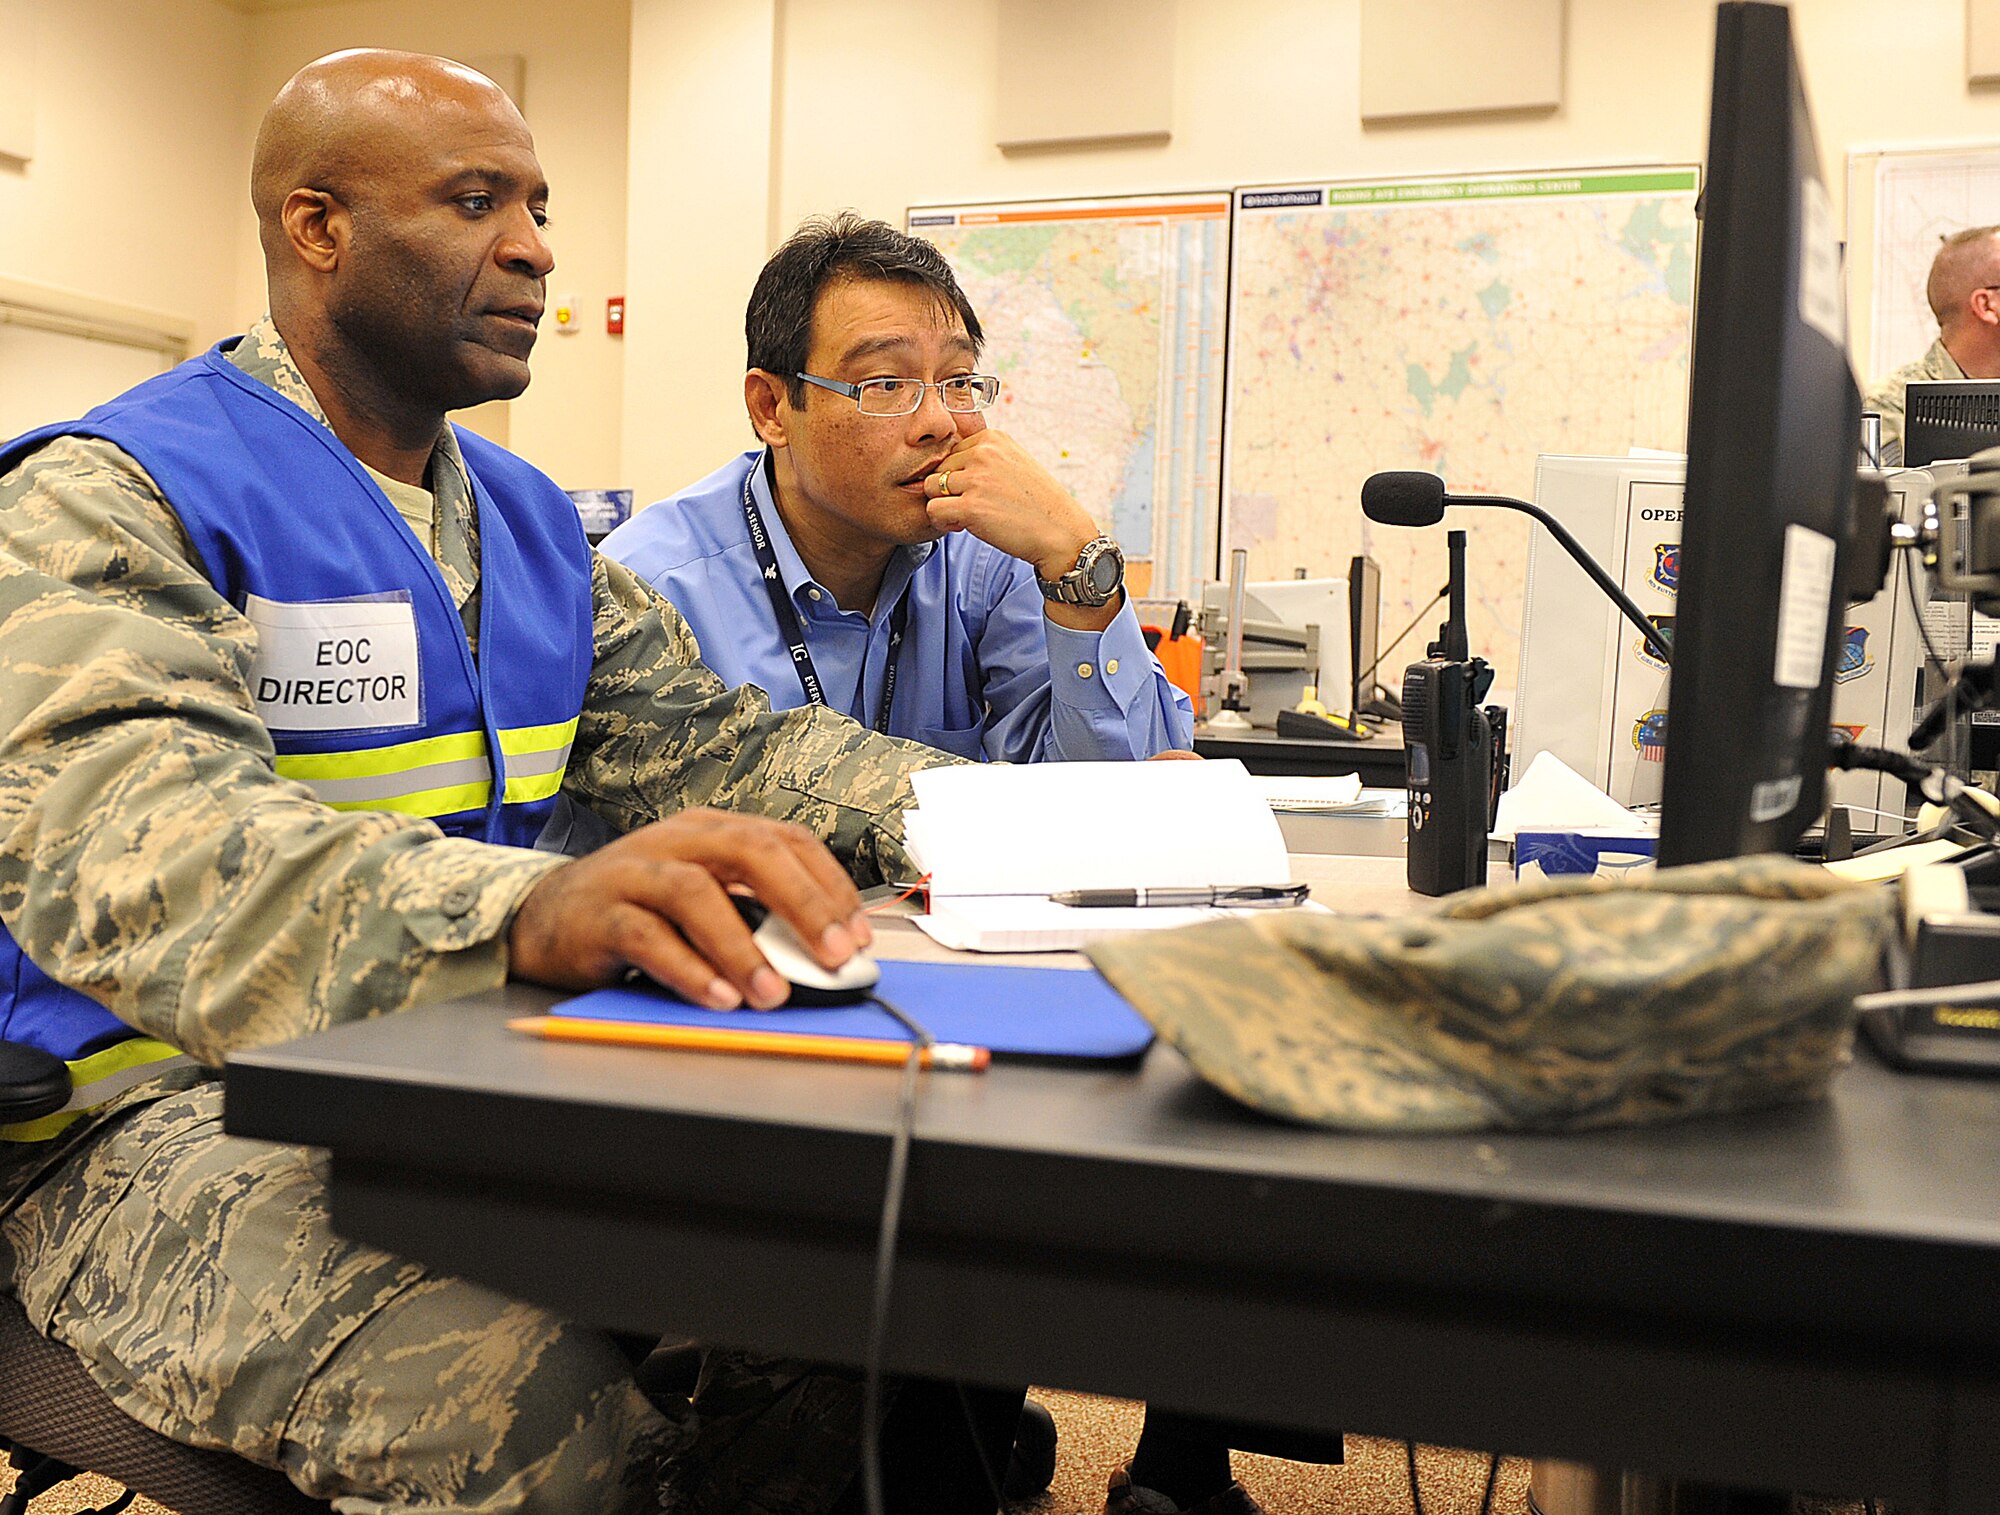 Col. Jarvis Baker, 78th Mission Support Group commander and Robins Emergency Operations Center director, and Mark Martinez, Installation Emergency manager, monitor emergency communication and coordination in the EOC which provides tactical response in the event of all types of disaster. A portion of this week’s exercise focused on natural disasters. (U.S. Air Force photo by Tommie Horton)